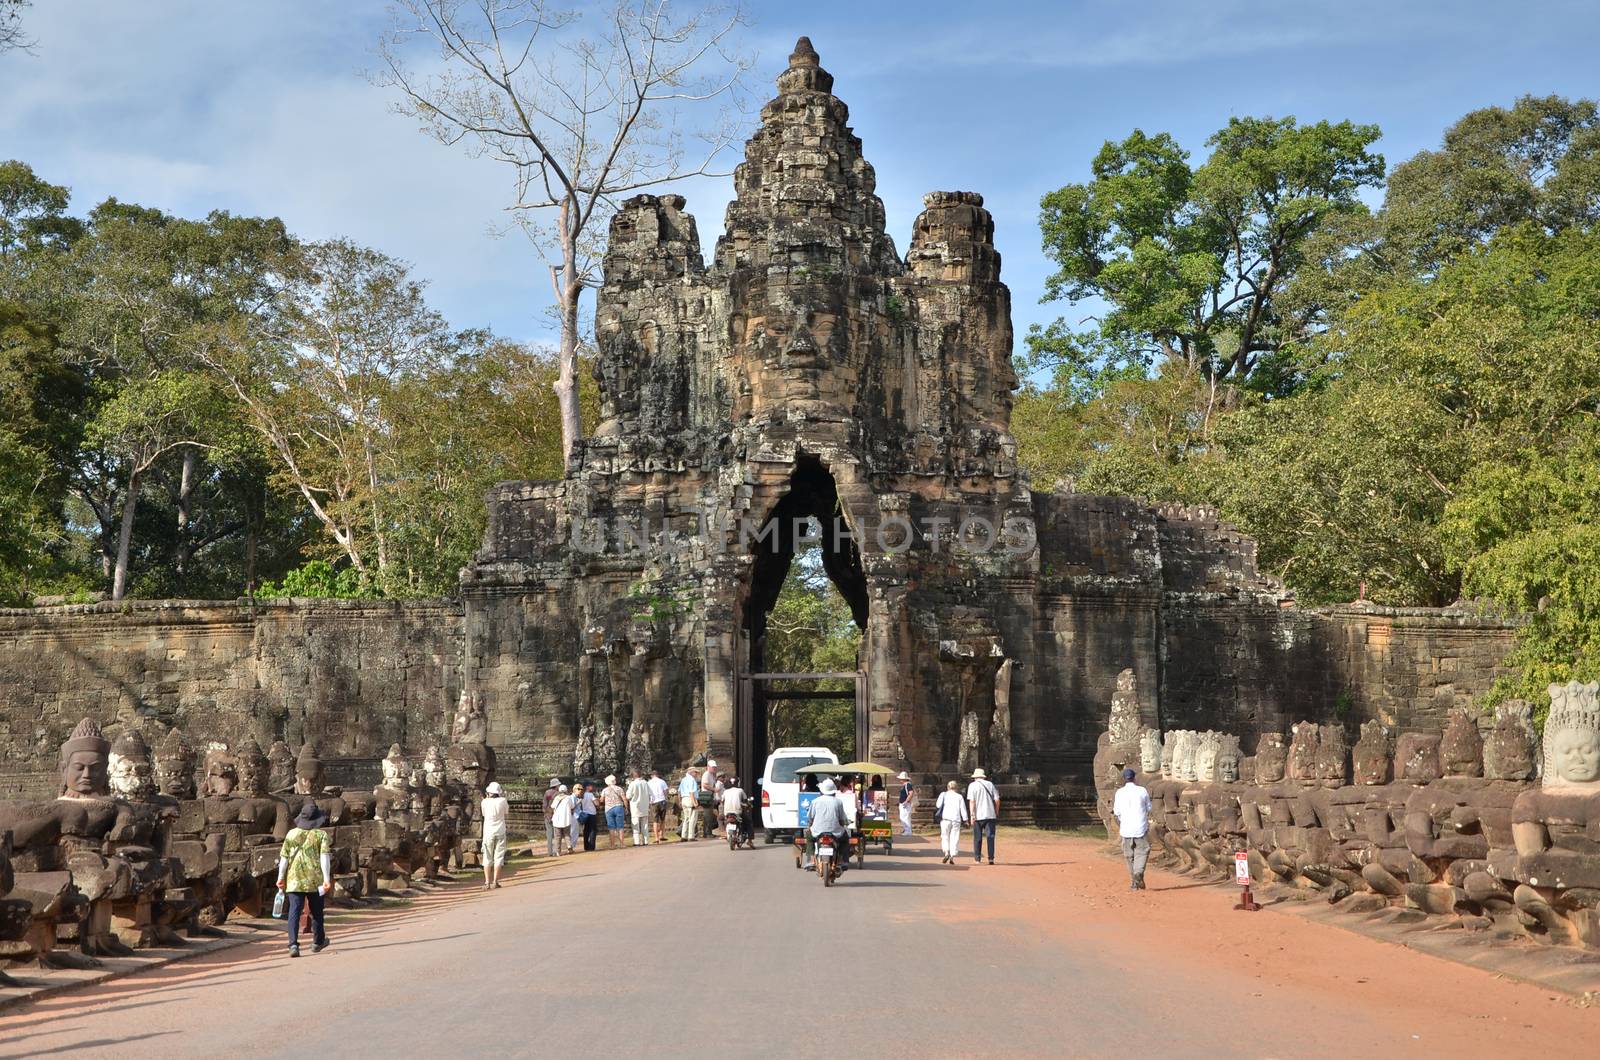 Siem Reap, Cambodia - December 4, 2015: Tourists at South gate to Angkor Thom in Siem Reap. by siraanamwong